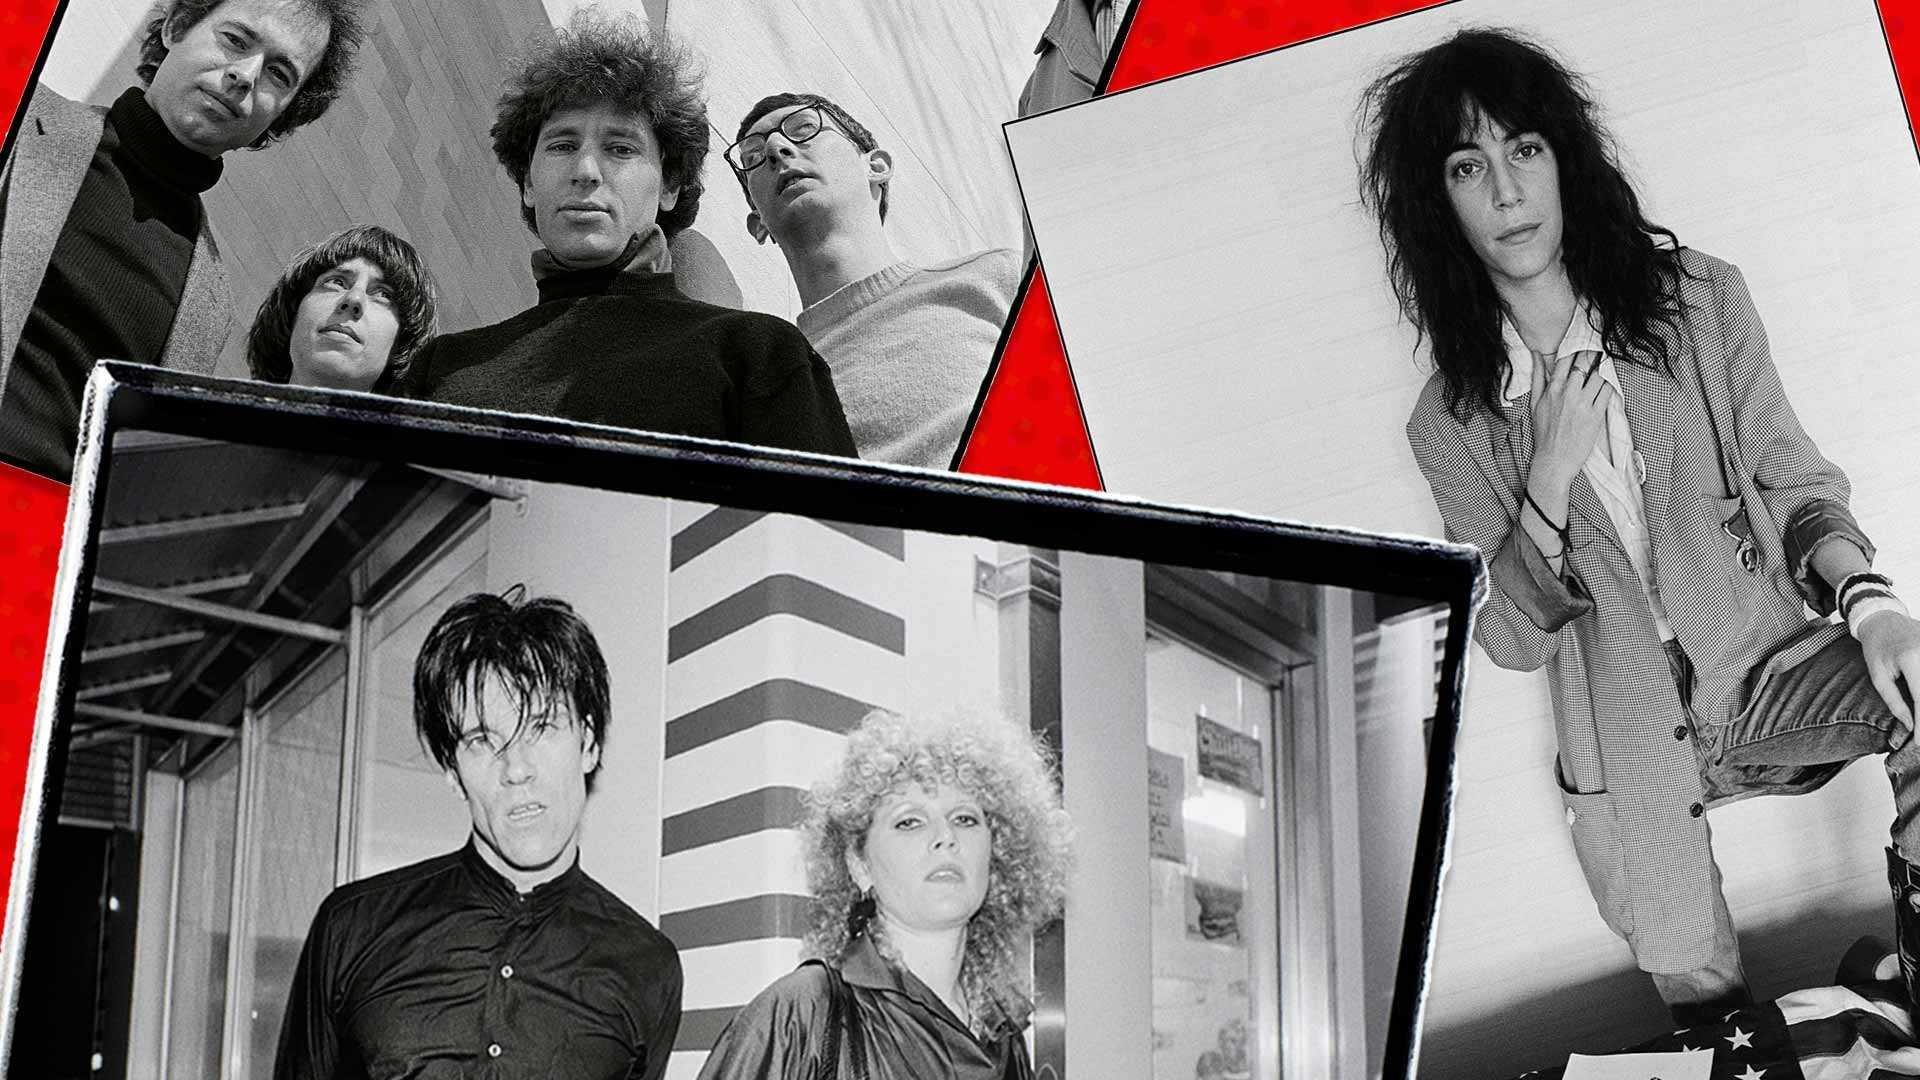 Vintage images of rockers Urban Verbs, Patti Smith and the Cramps.